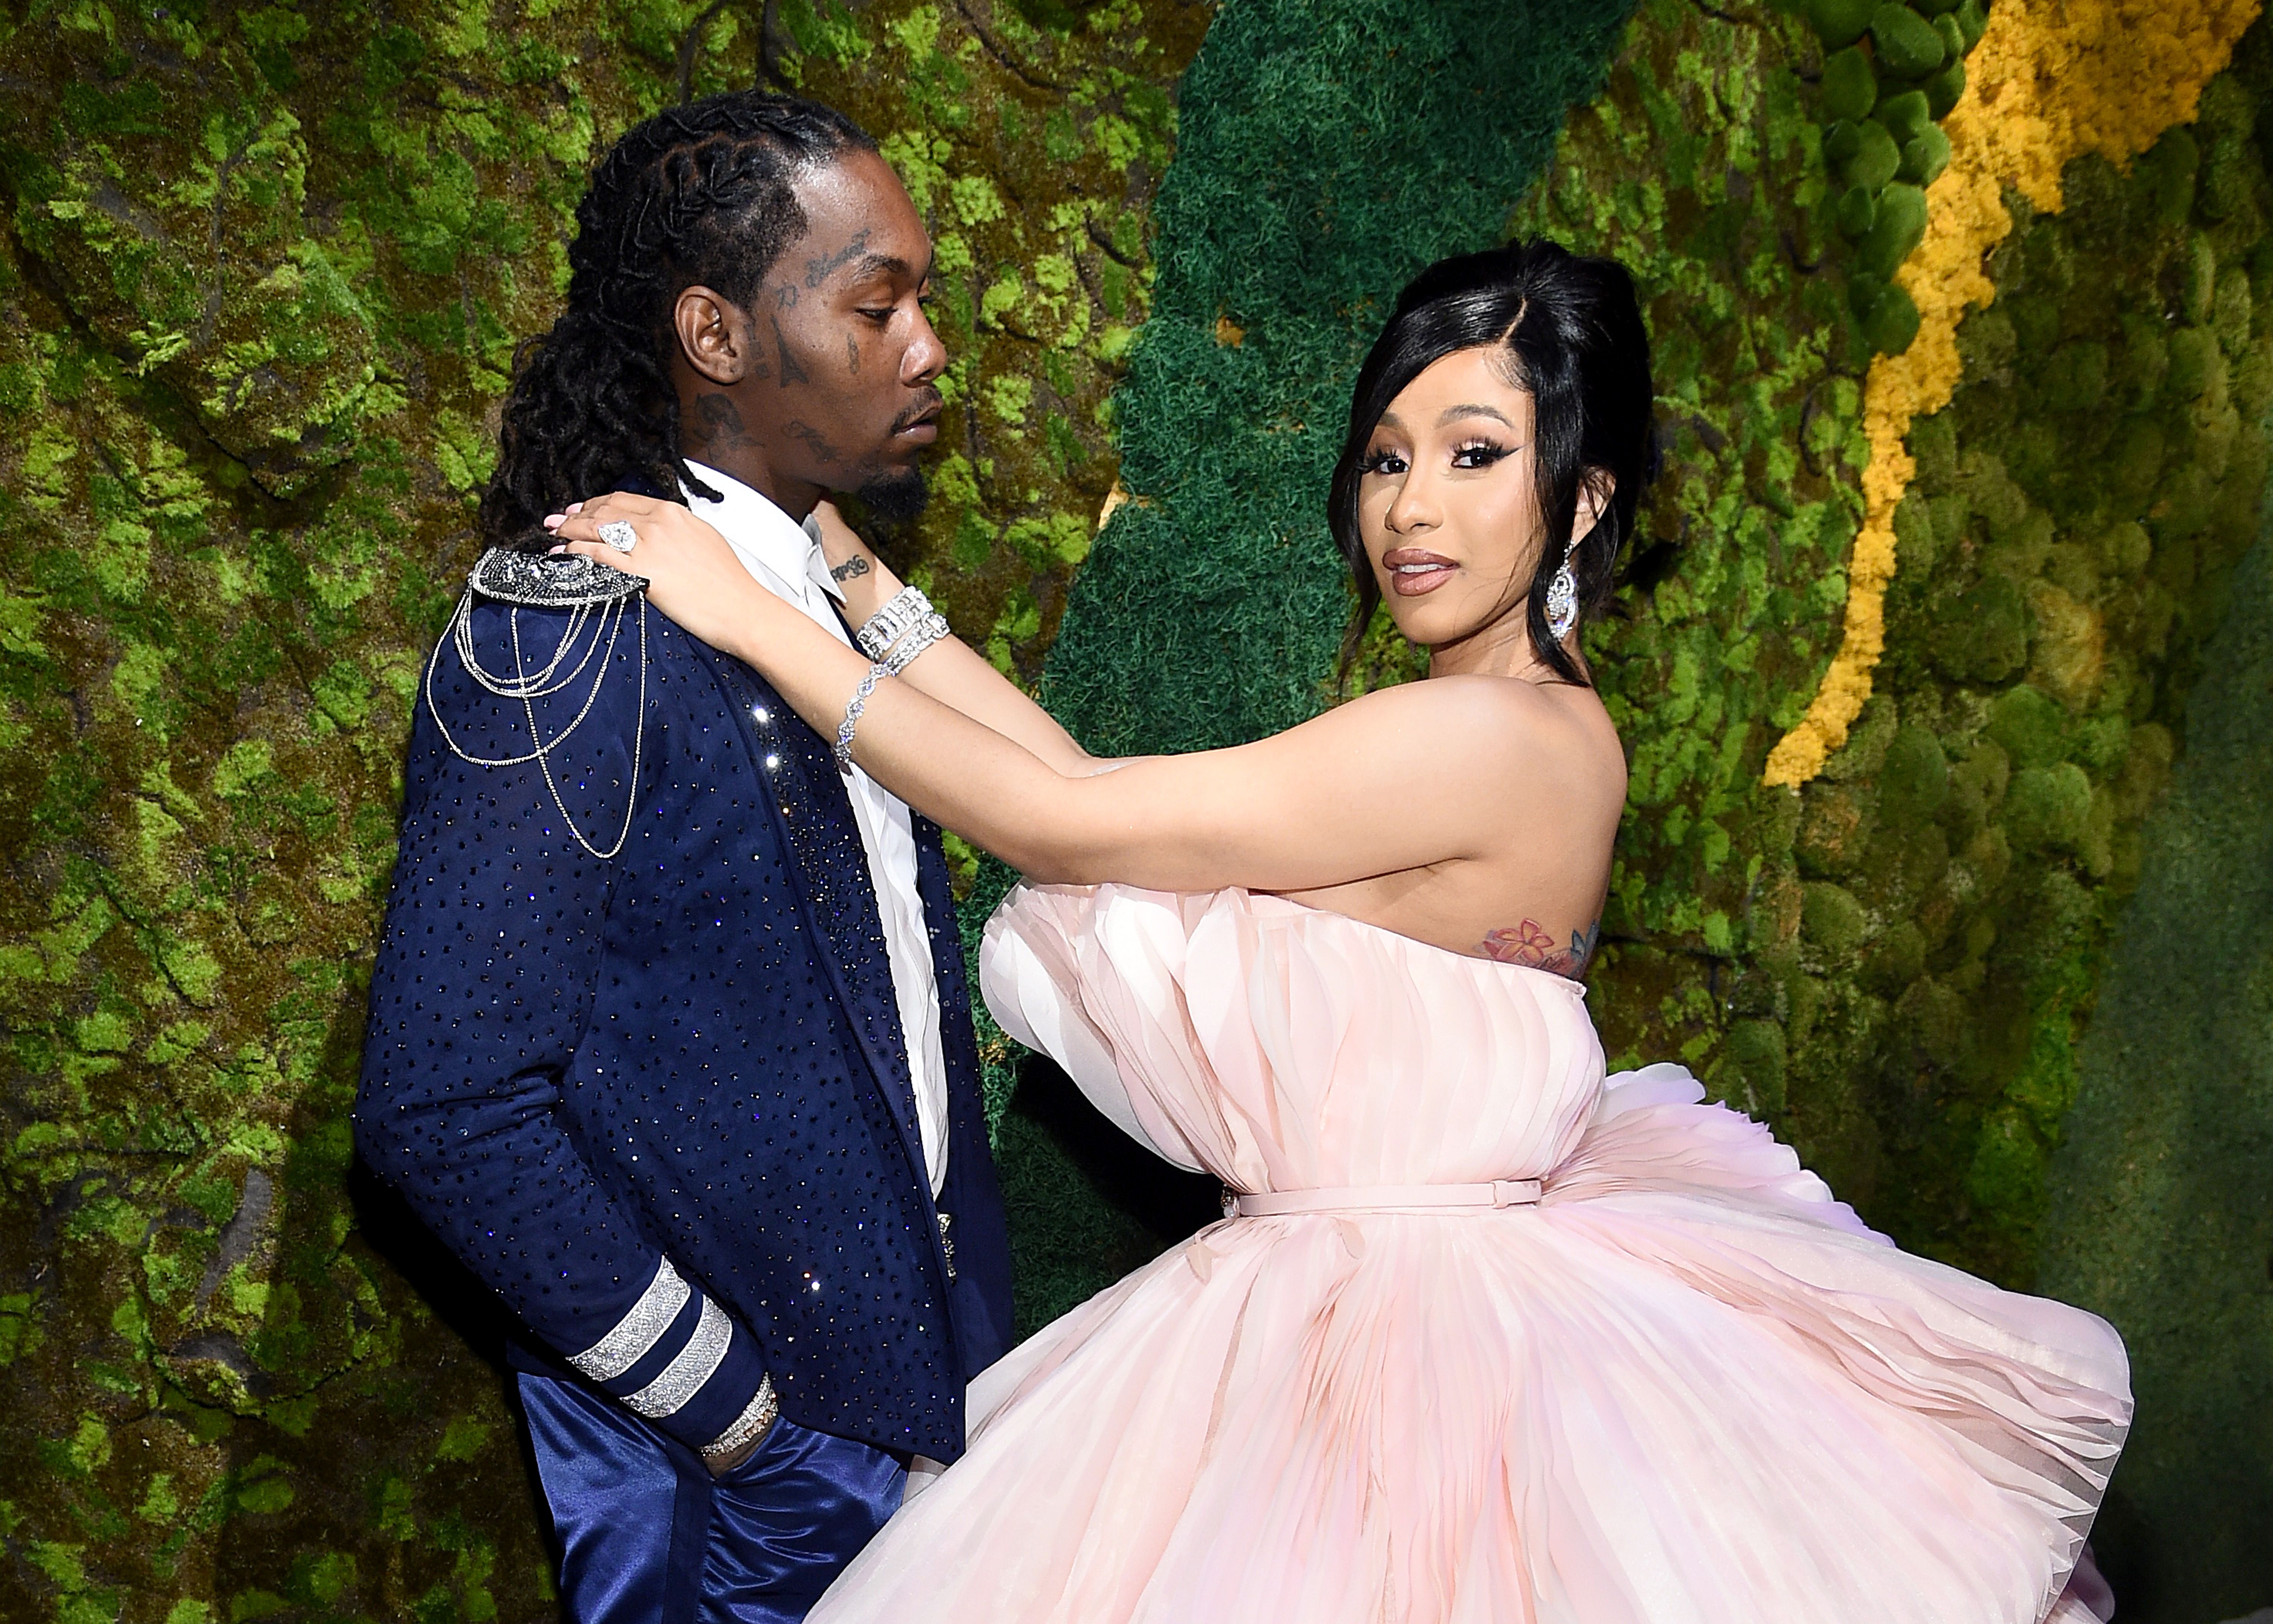 Cardi B on Why She Stayed With Offset After He Cheated photo image